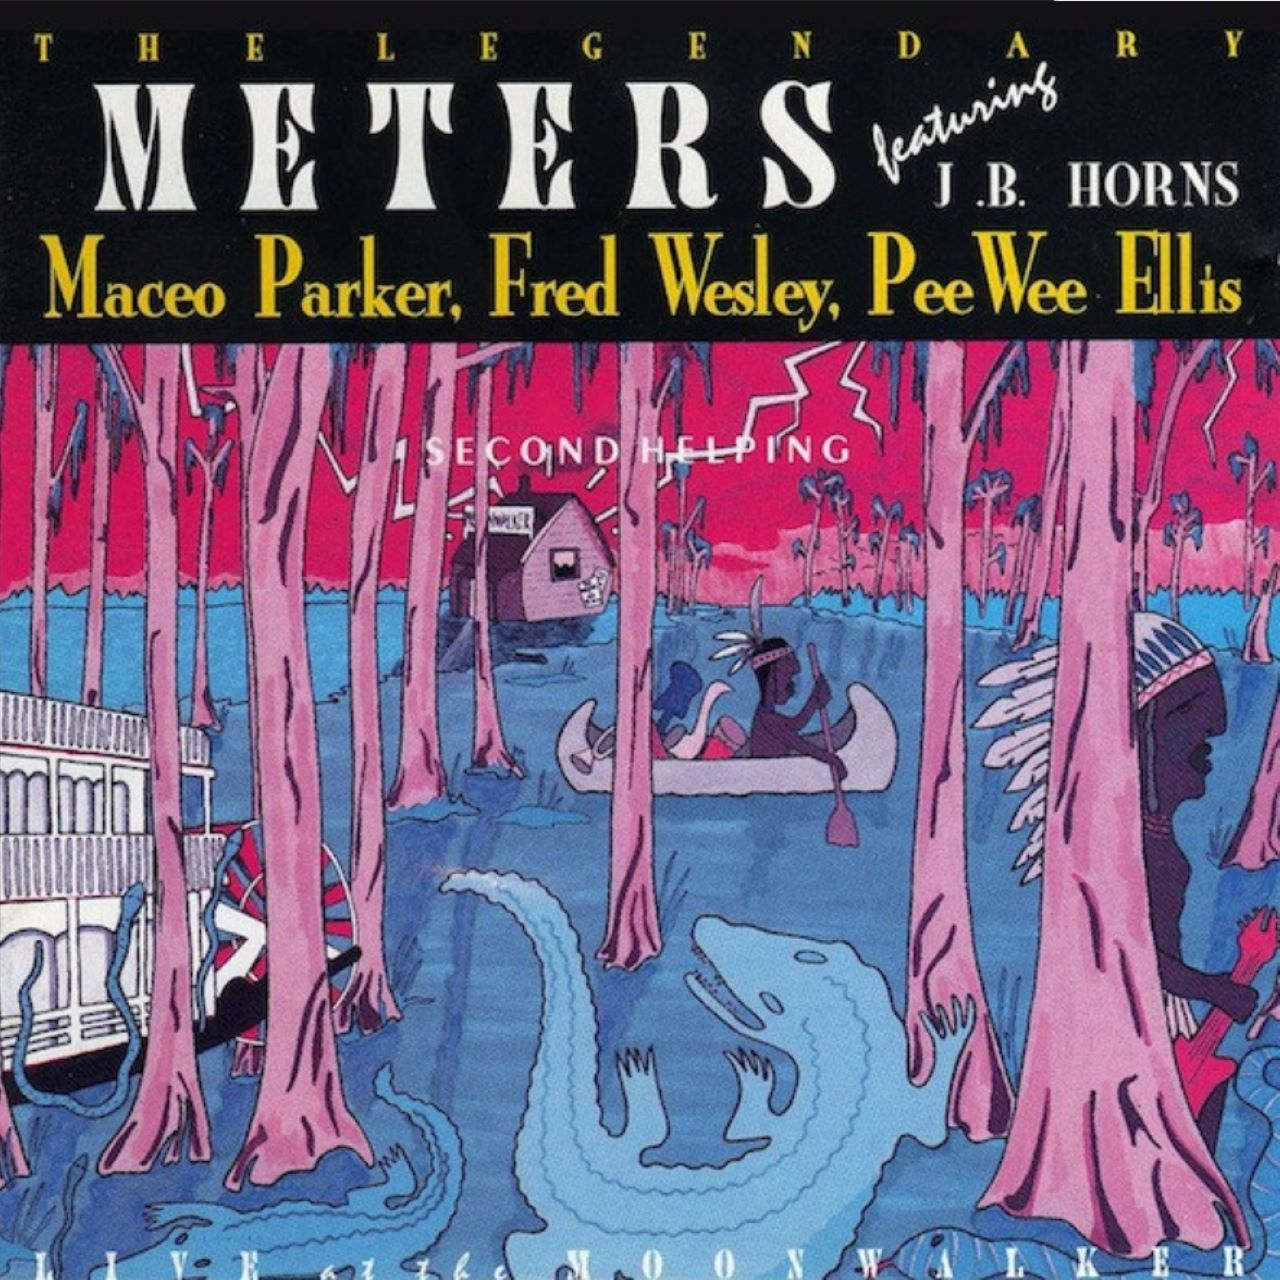 Meters – Live At The Moonwalker, Second Helping cover album